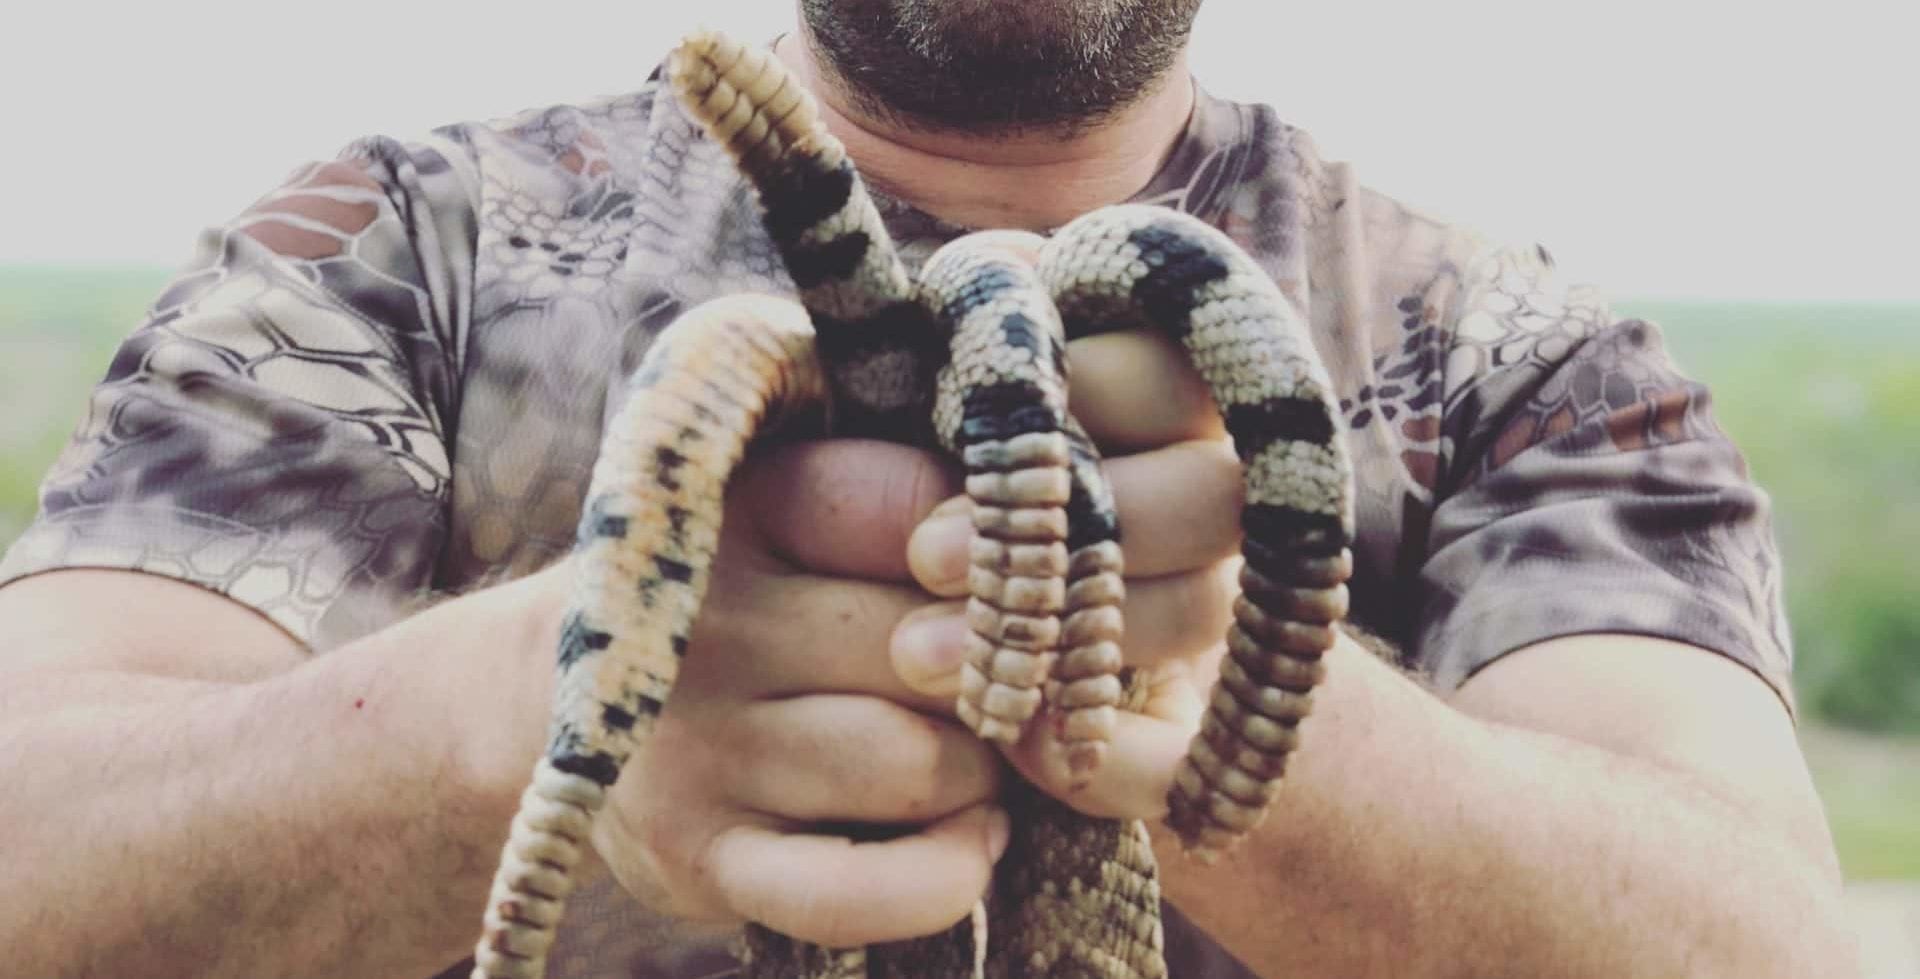 South Texas Rattlesnake Hunting…a Bouquet of Fear